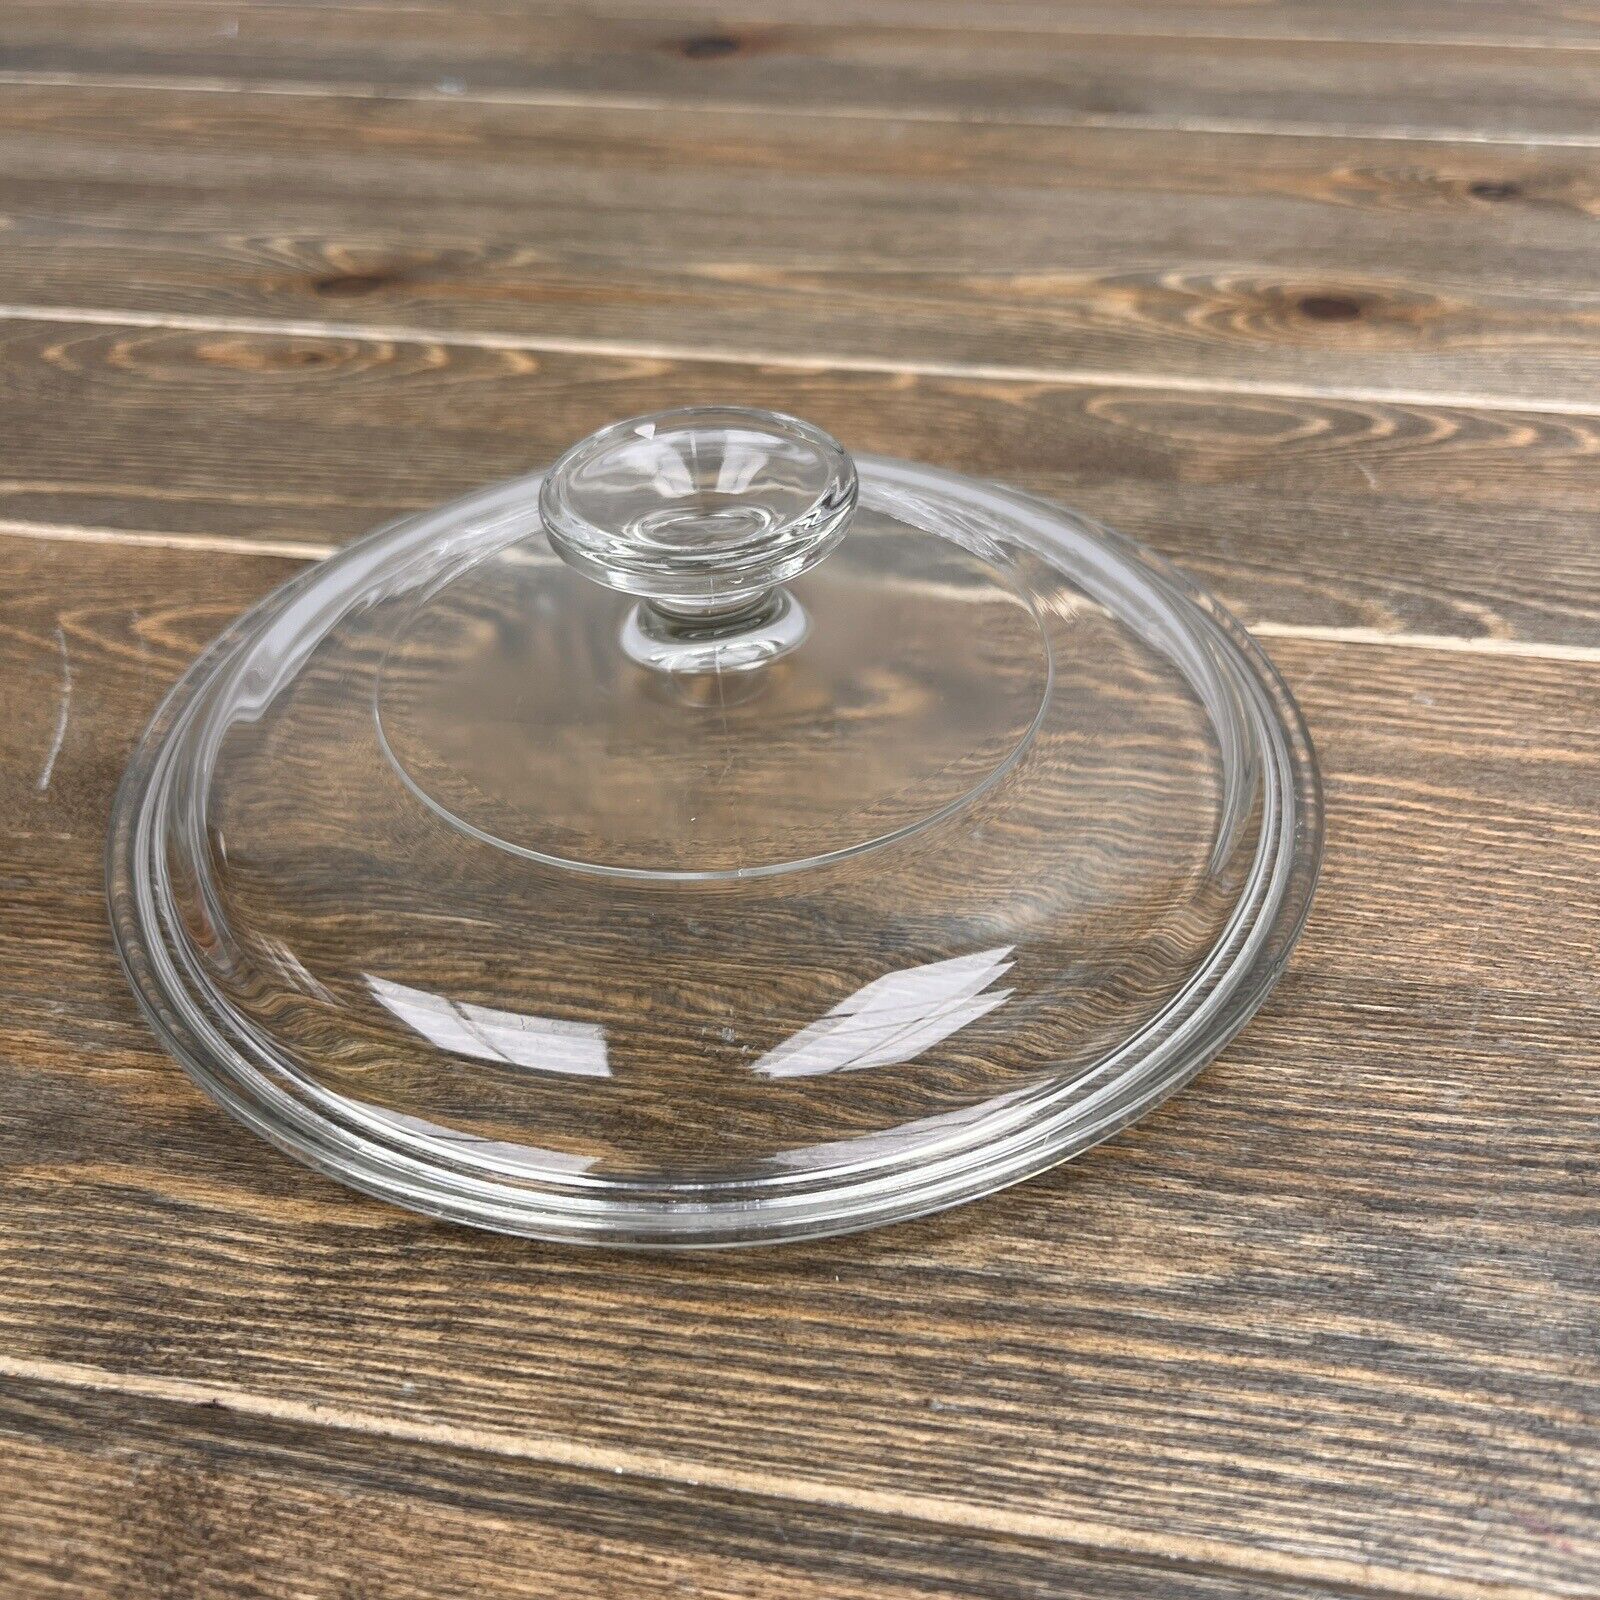 Pyrex G5C Replacement Glass Lid G-5-C Corning Ware 8” Clear